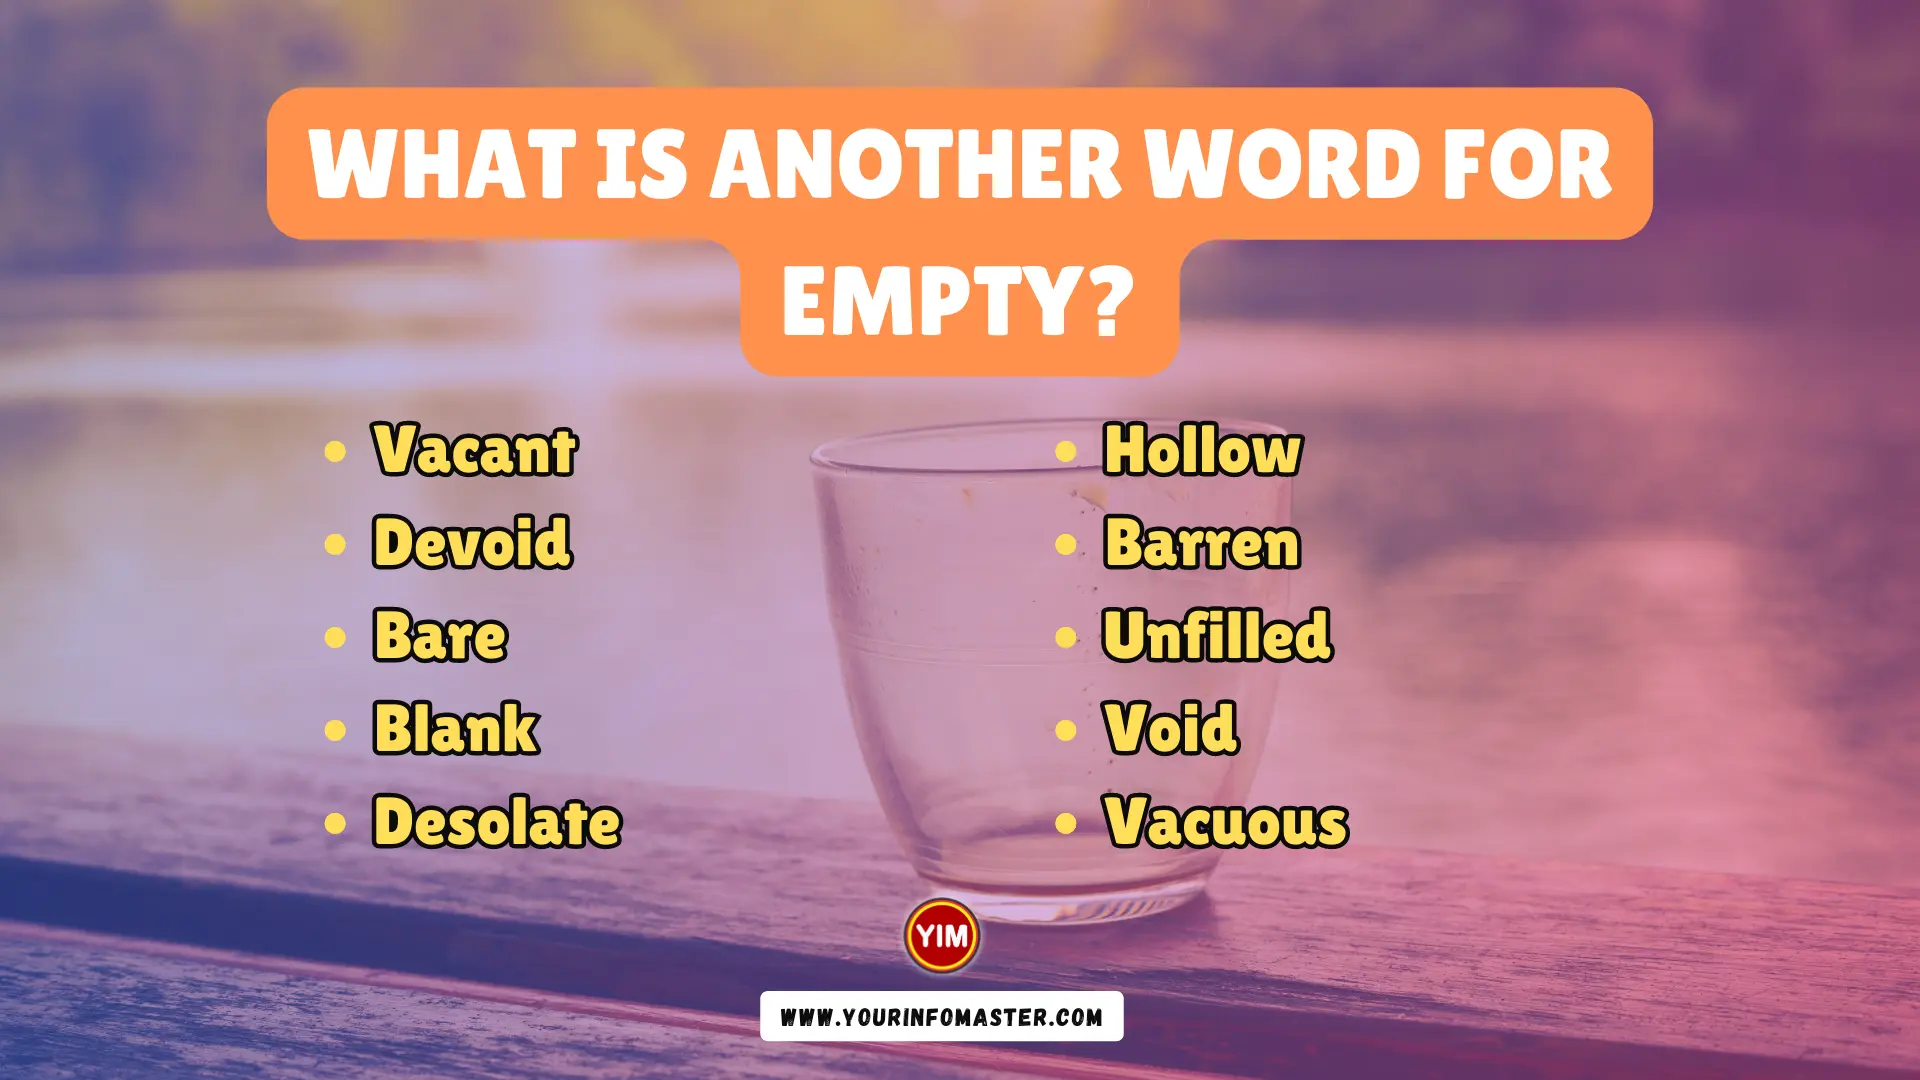 What is another word for Empty